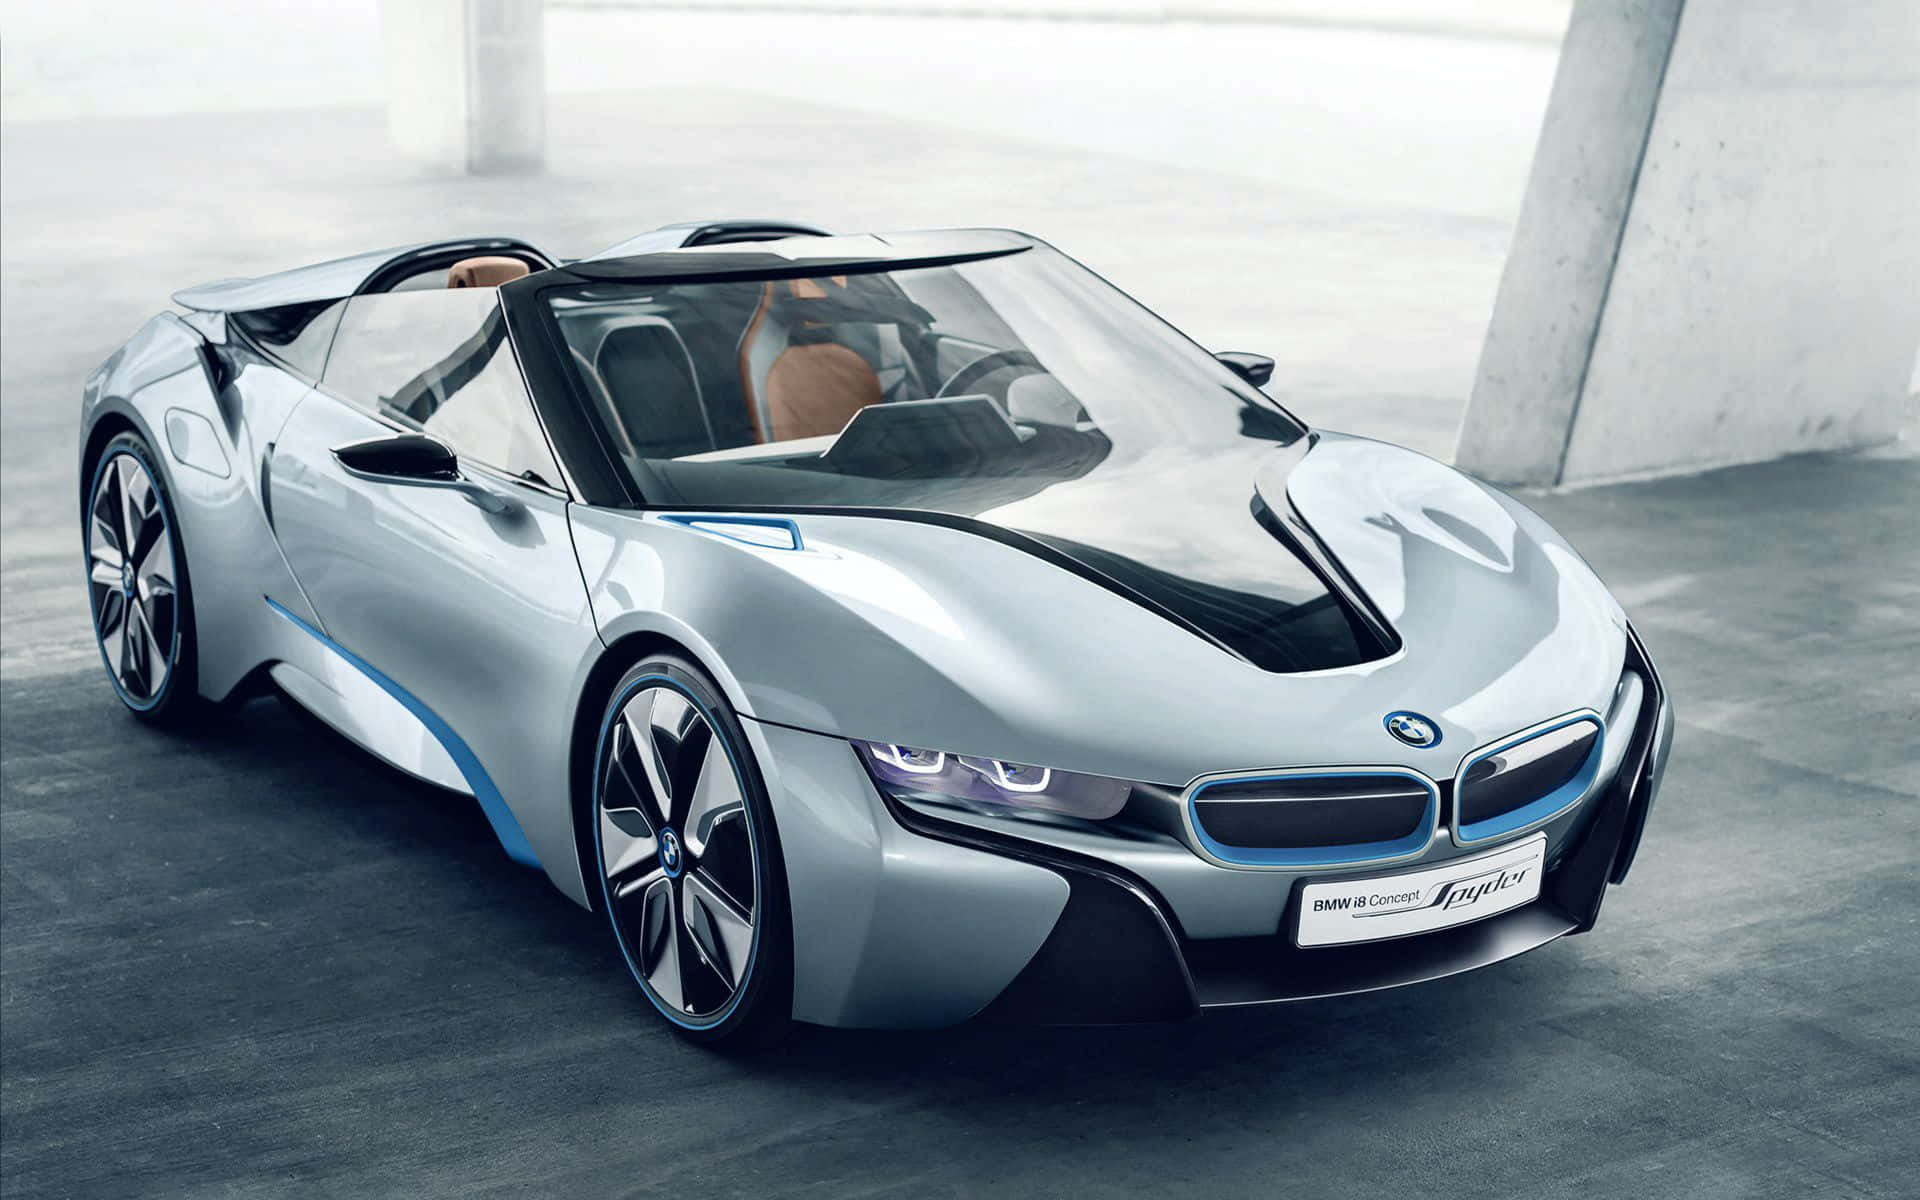 BMW Cars - iconic design, thrilling performance. Wallpaper